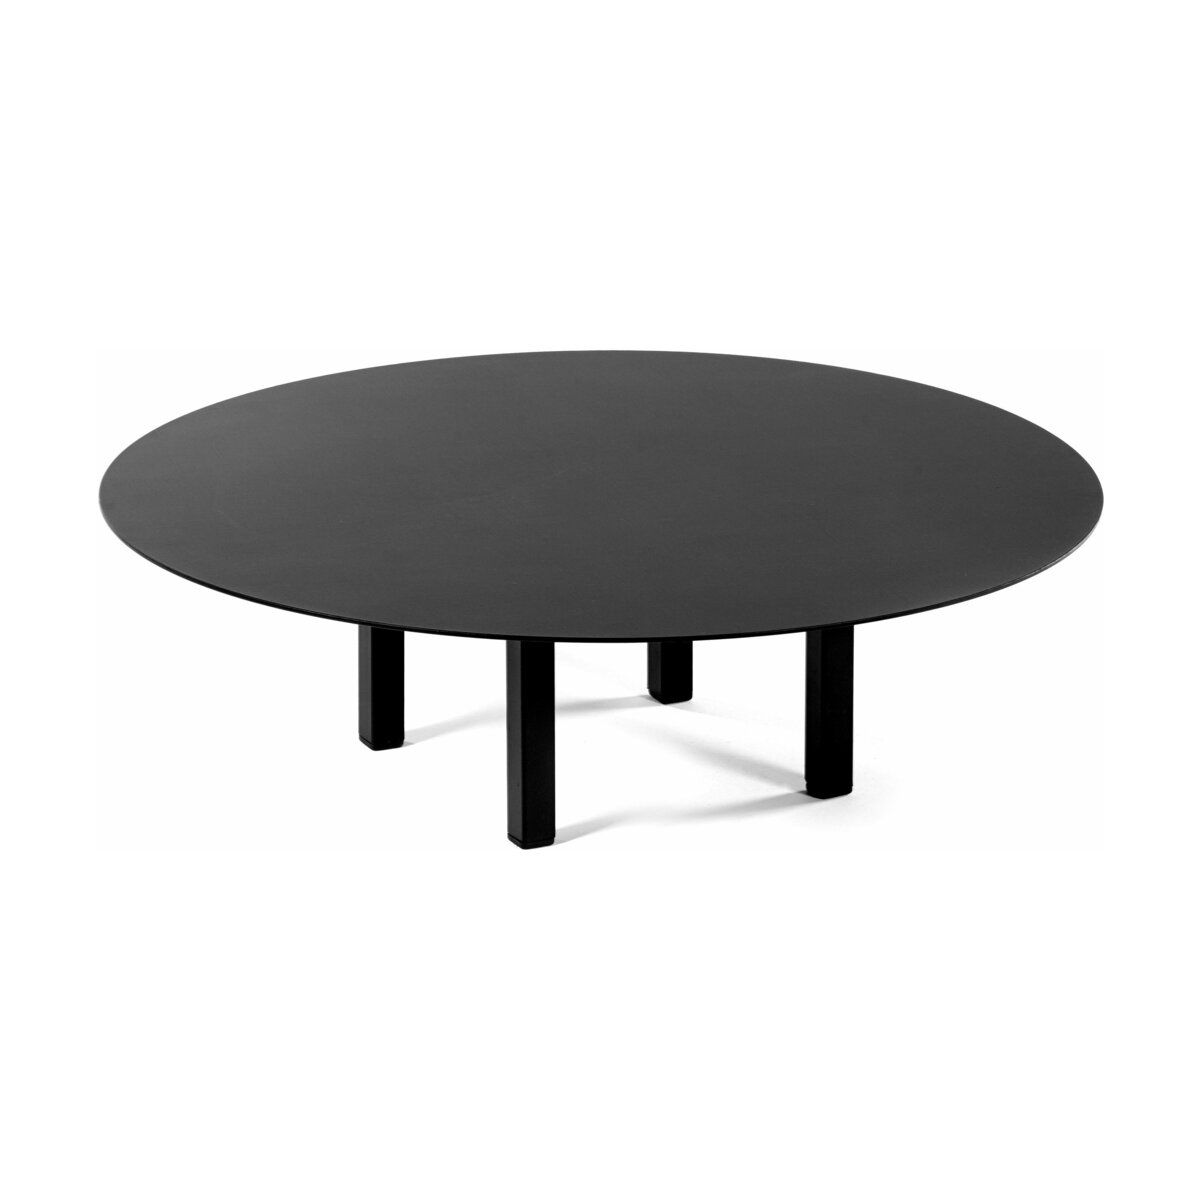 Coffee Table Ronde 68 Cm In Black Metal 01 – Serax With Full Black Round Coffee Tables (View 10 of 15)